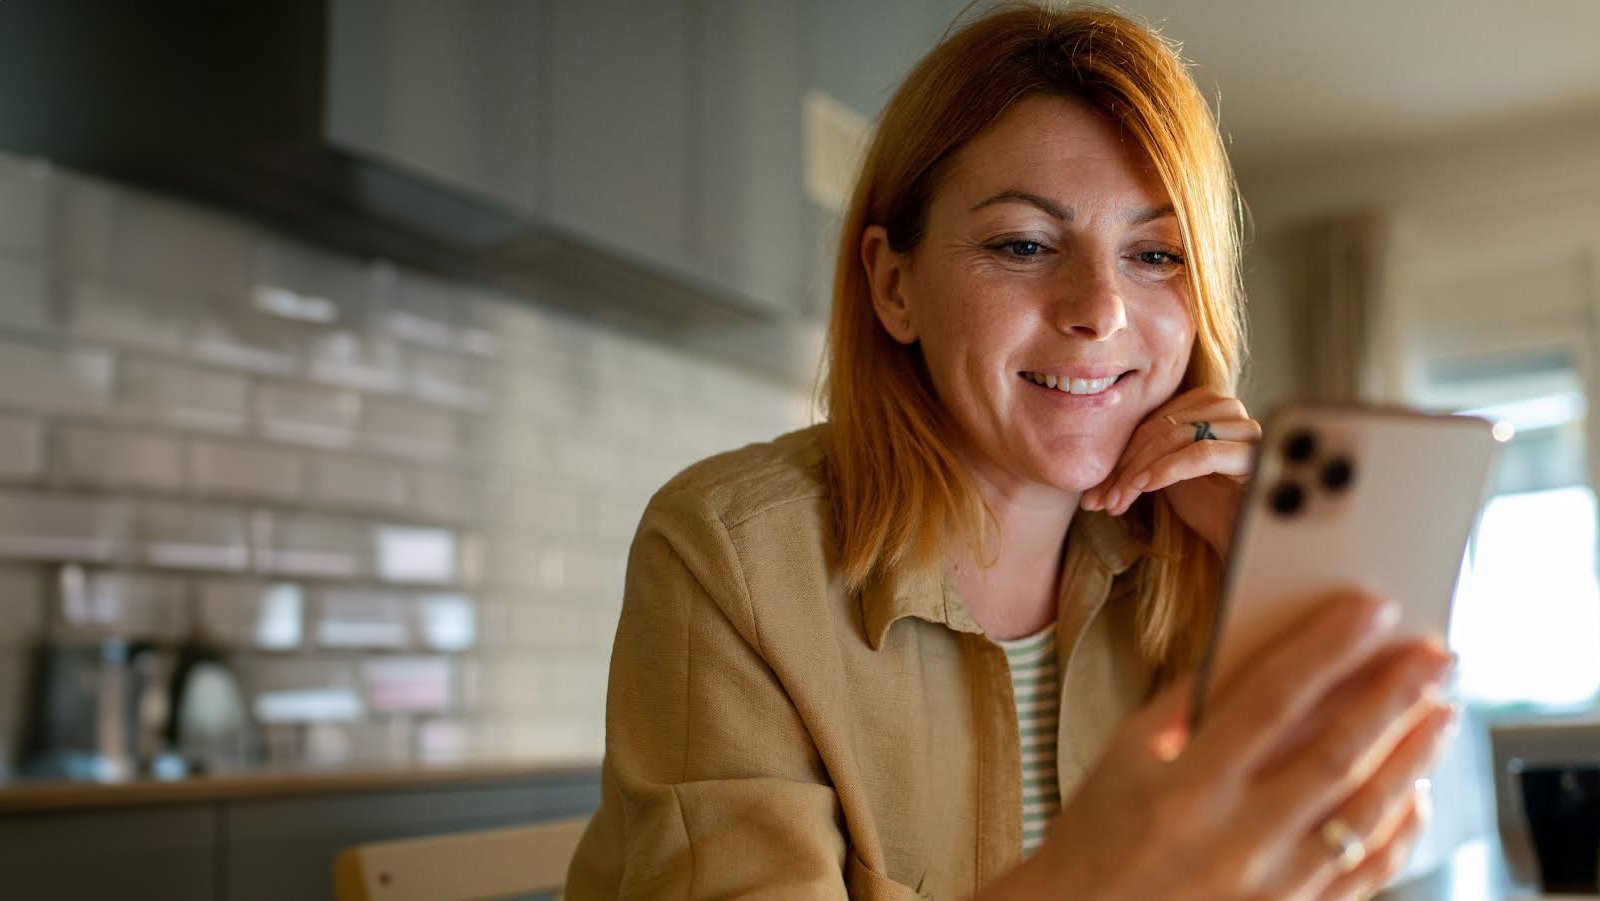 Women standing in a Kitchen smiling while looking at the phone she is holding in her hand